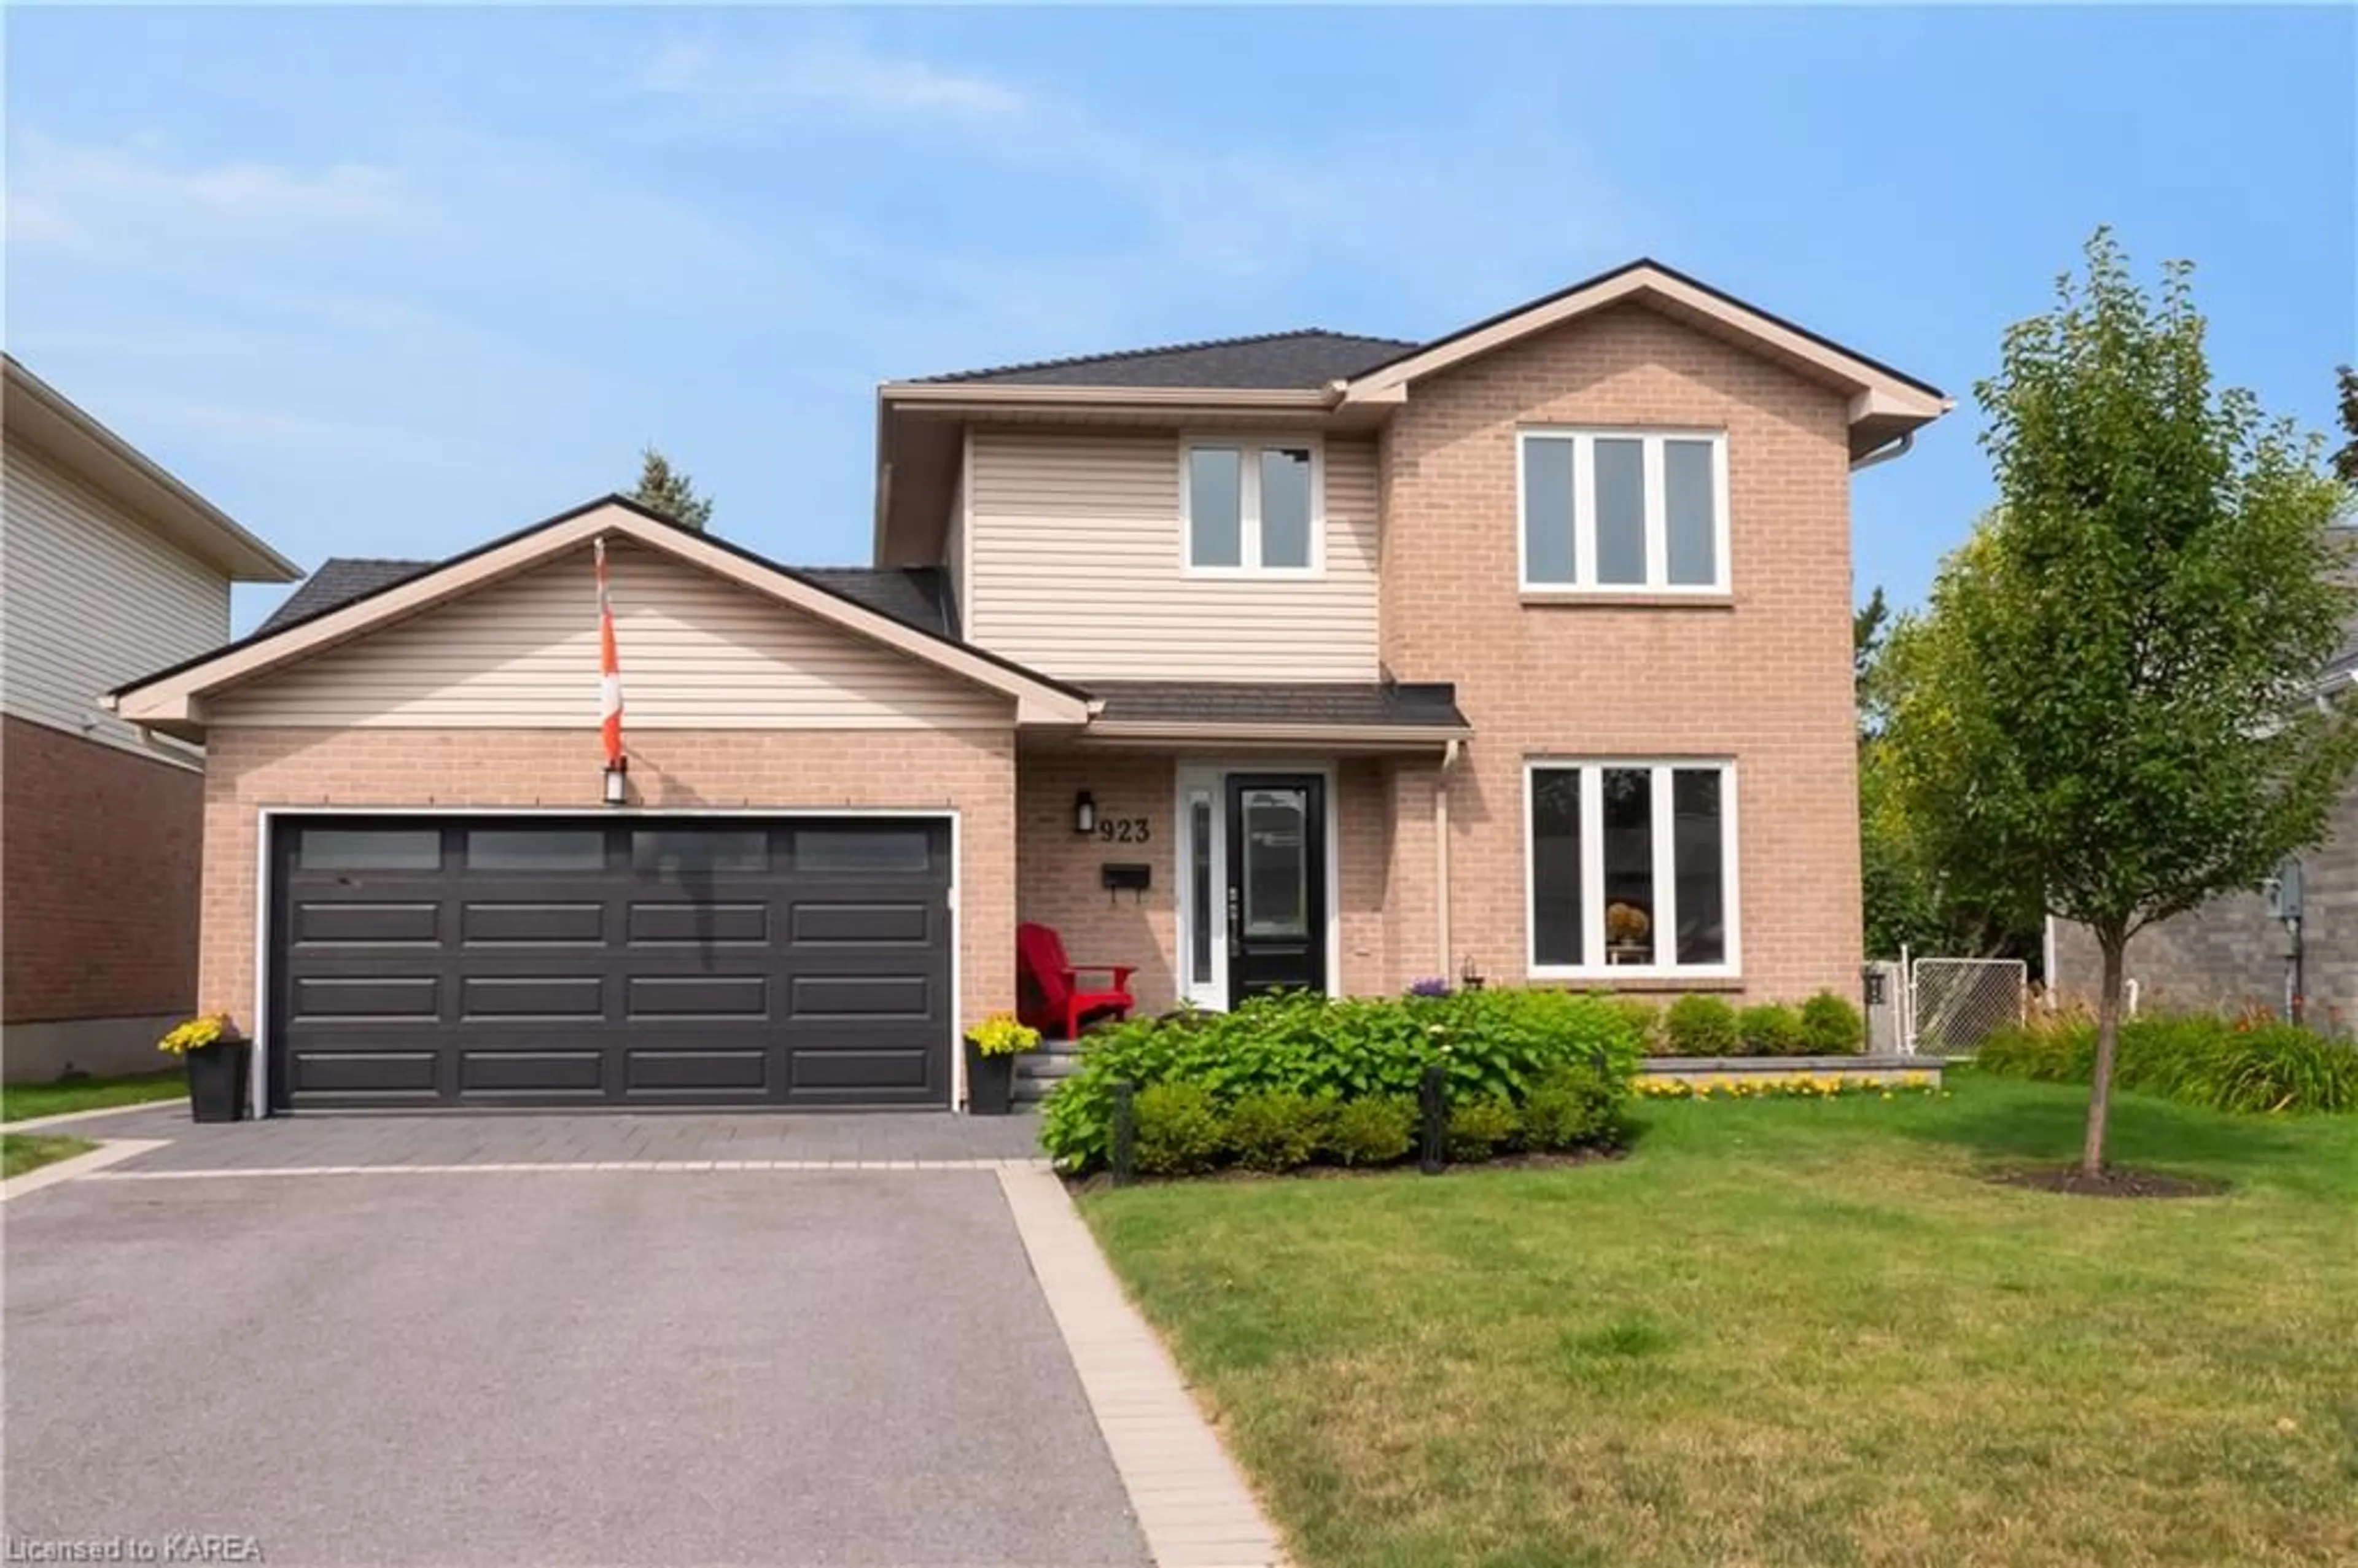 Frontside or backside of a home for 923 Limestone Dr, Kingston Ontario K7P 2R7